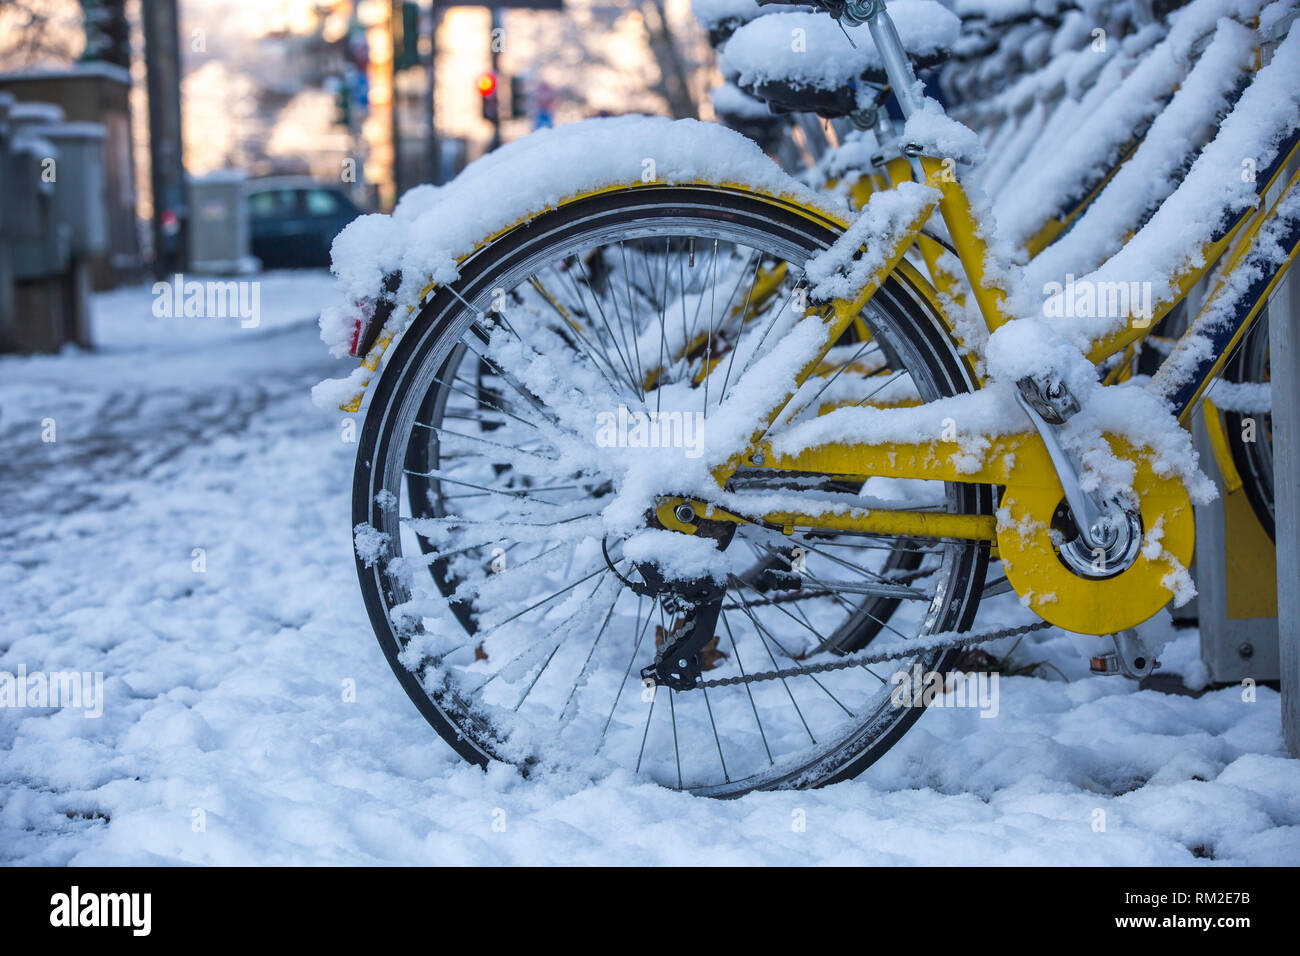 Row of snow-covered bicycles for rent. Stock Photo